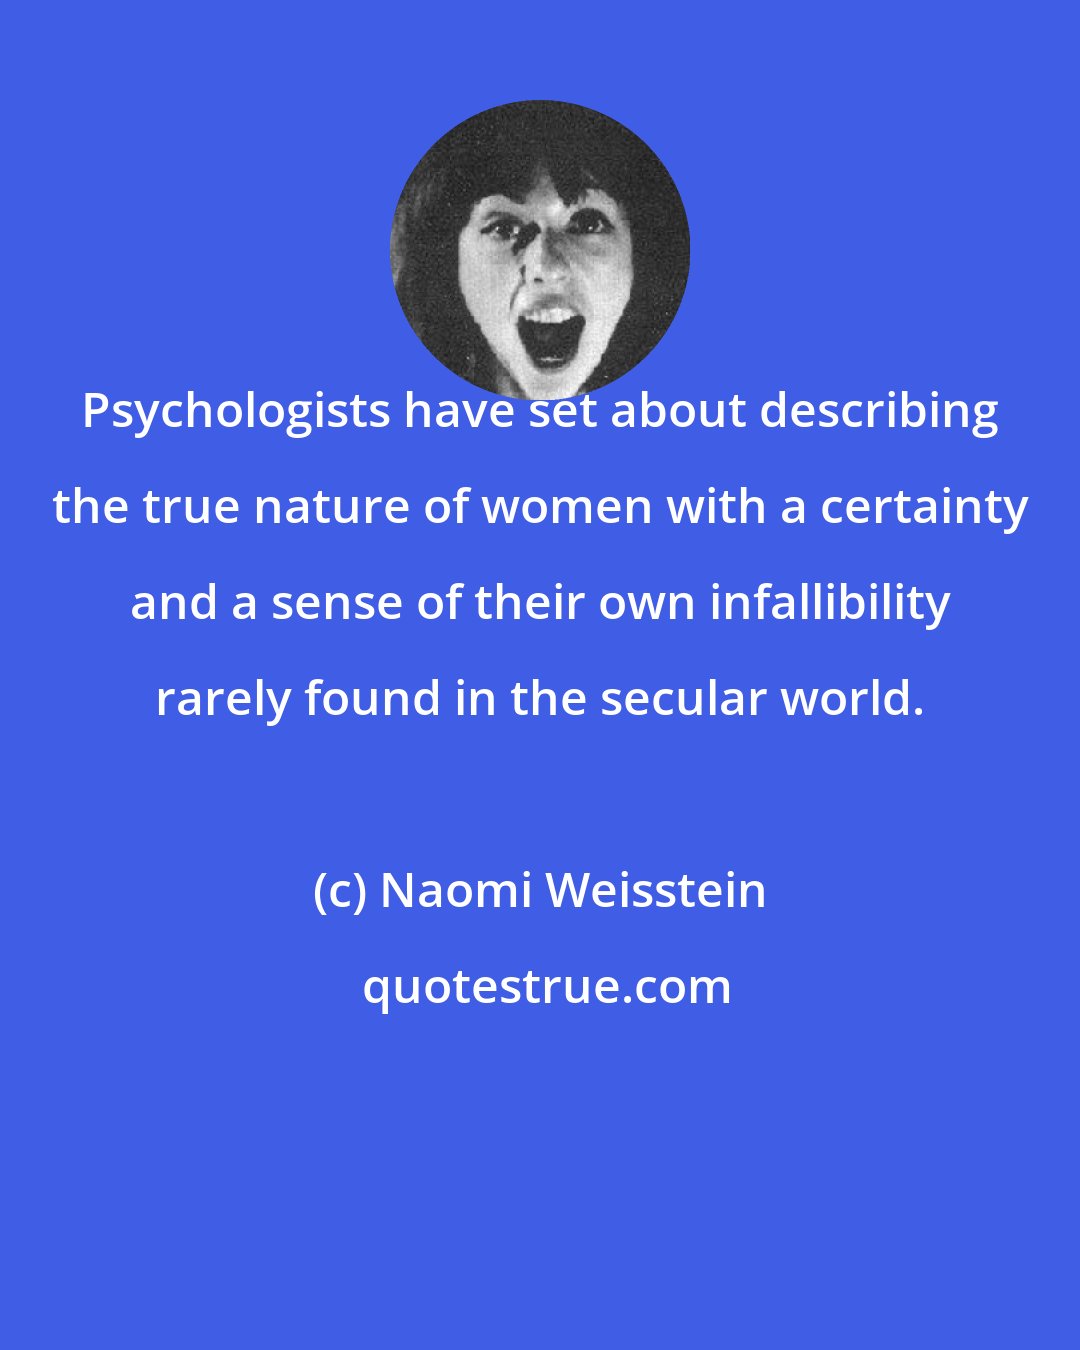 Naomi Weisstein: Psychologists have set about describing the true nature of women with a certainty and a sense of their own infallibility rarely found in the secular world.